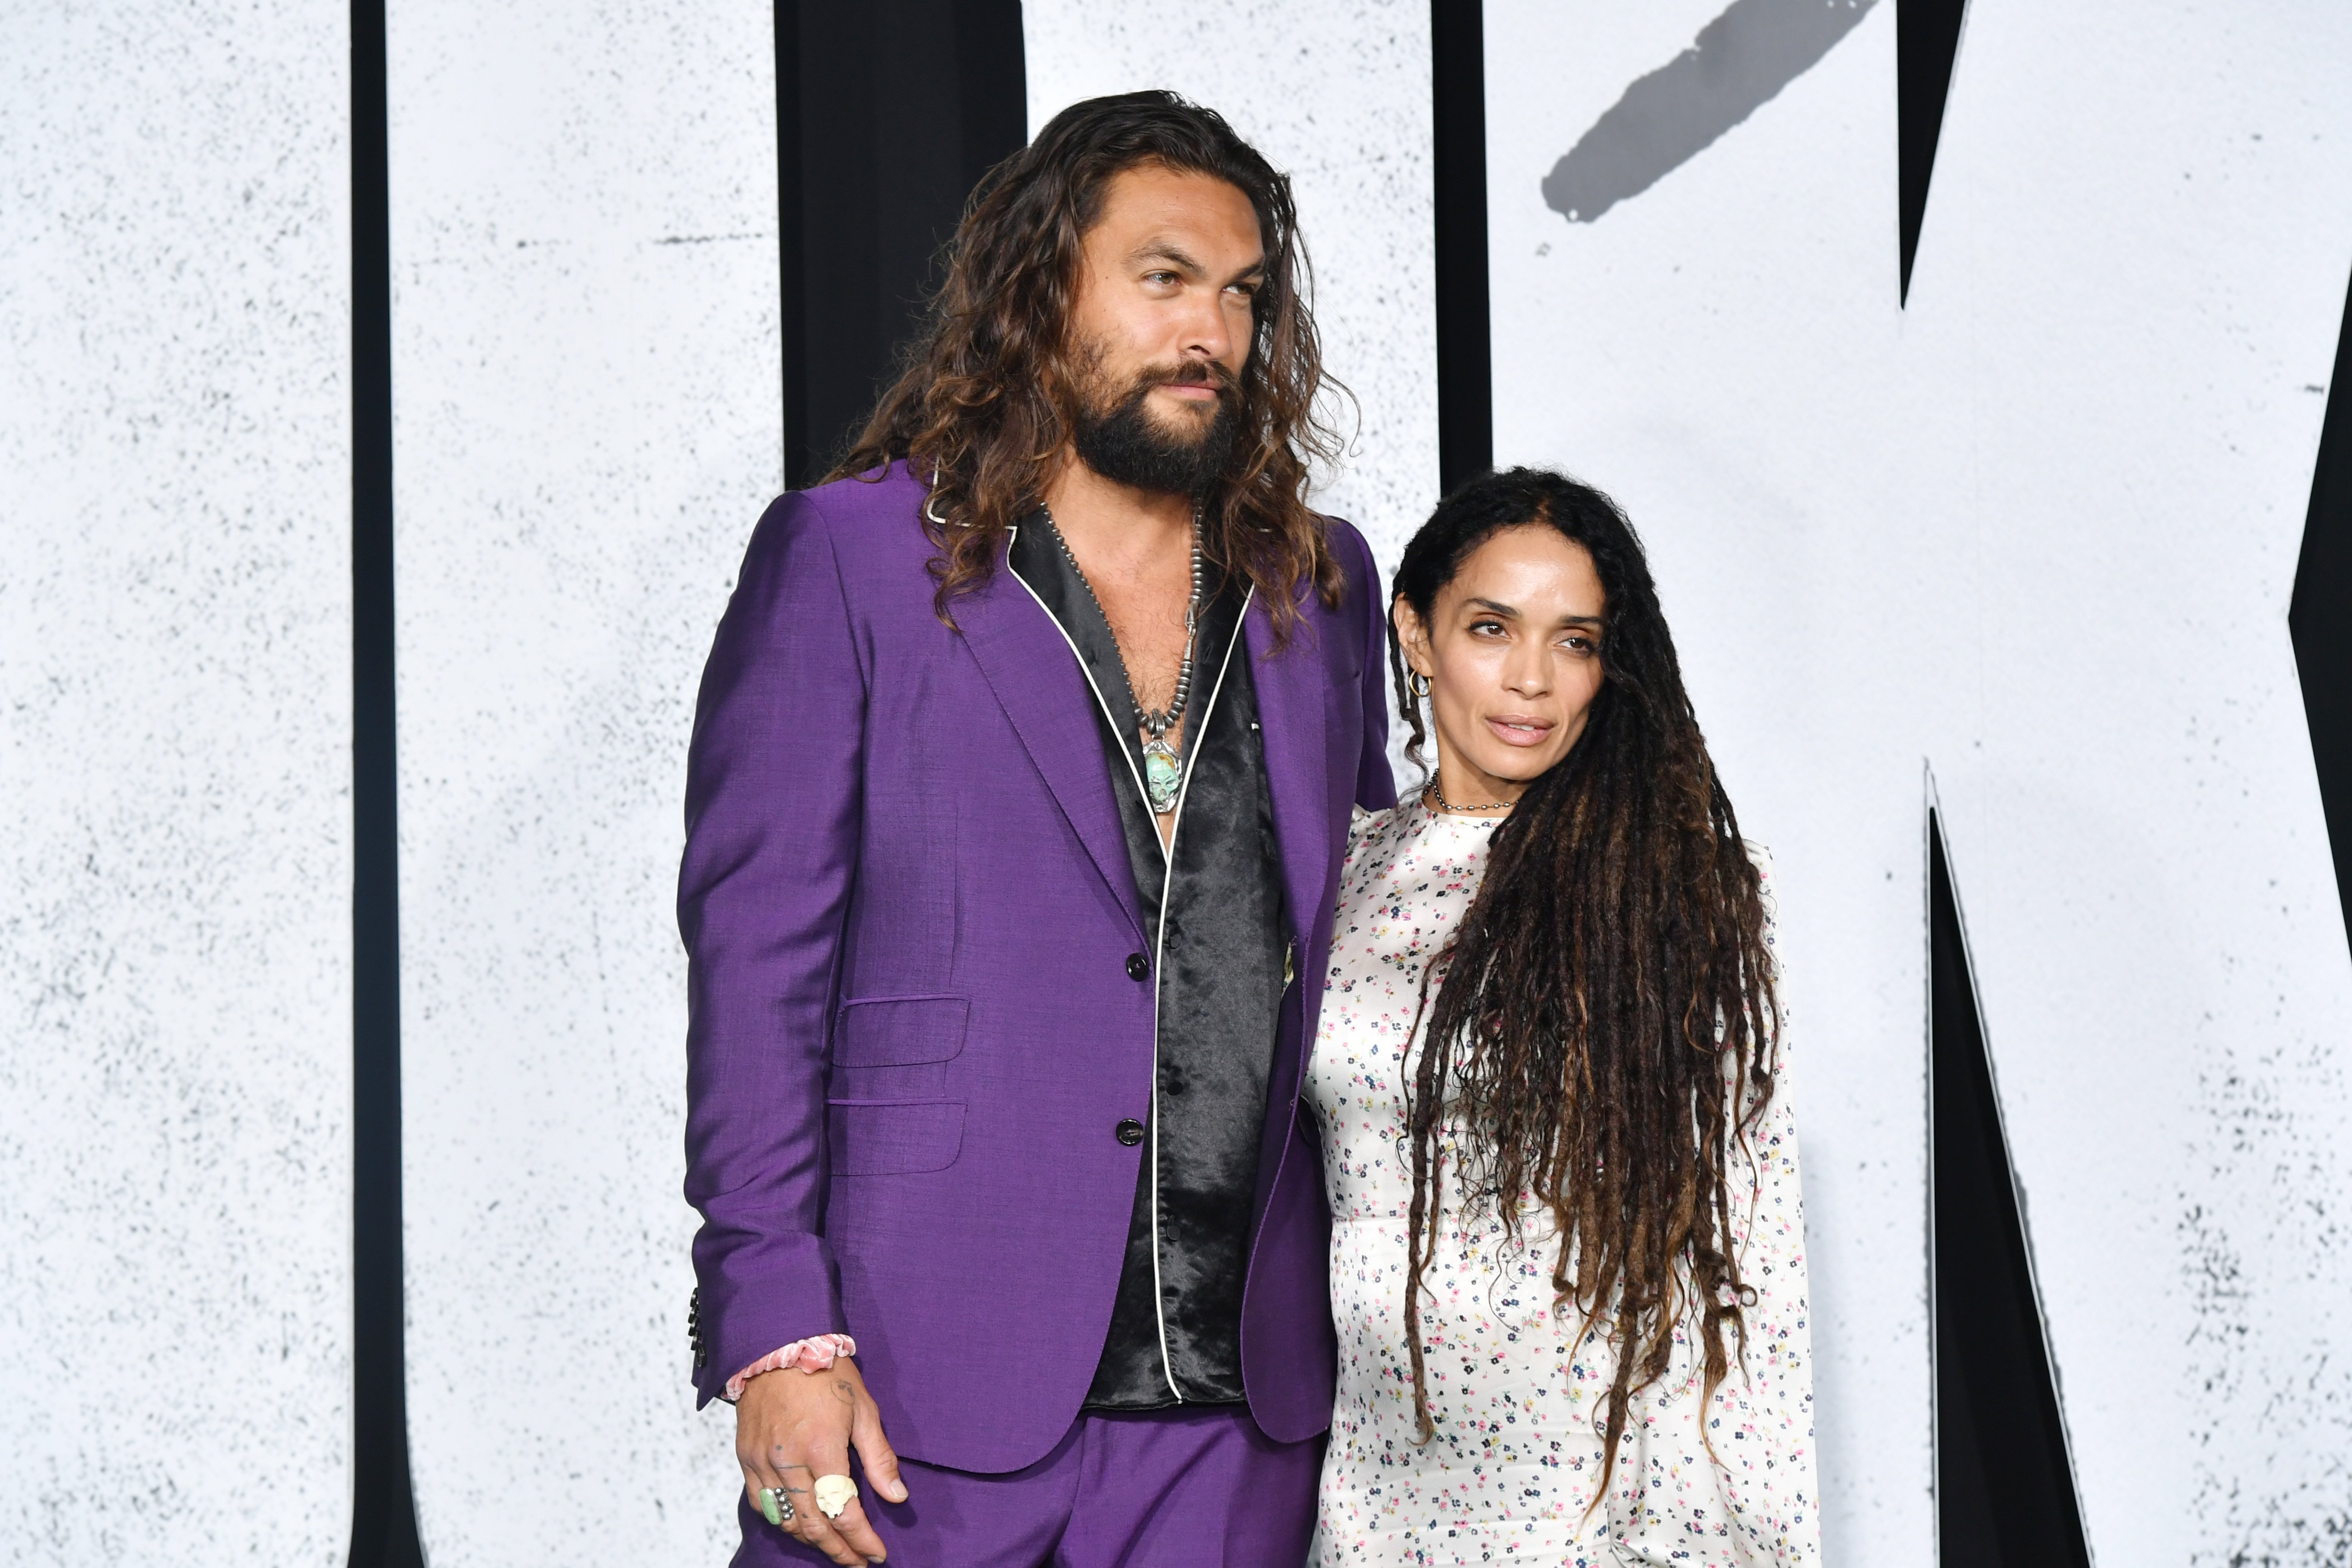 Jason Momoa and Lisa Bonet attend the premiere of Warner Bros Pictures "Joker" on September 28, 2019 in Hollywood, California. | Source: Getty Images